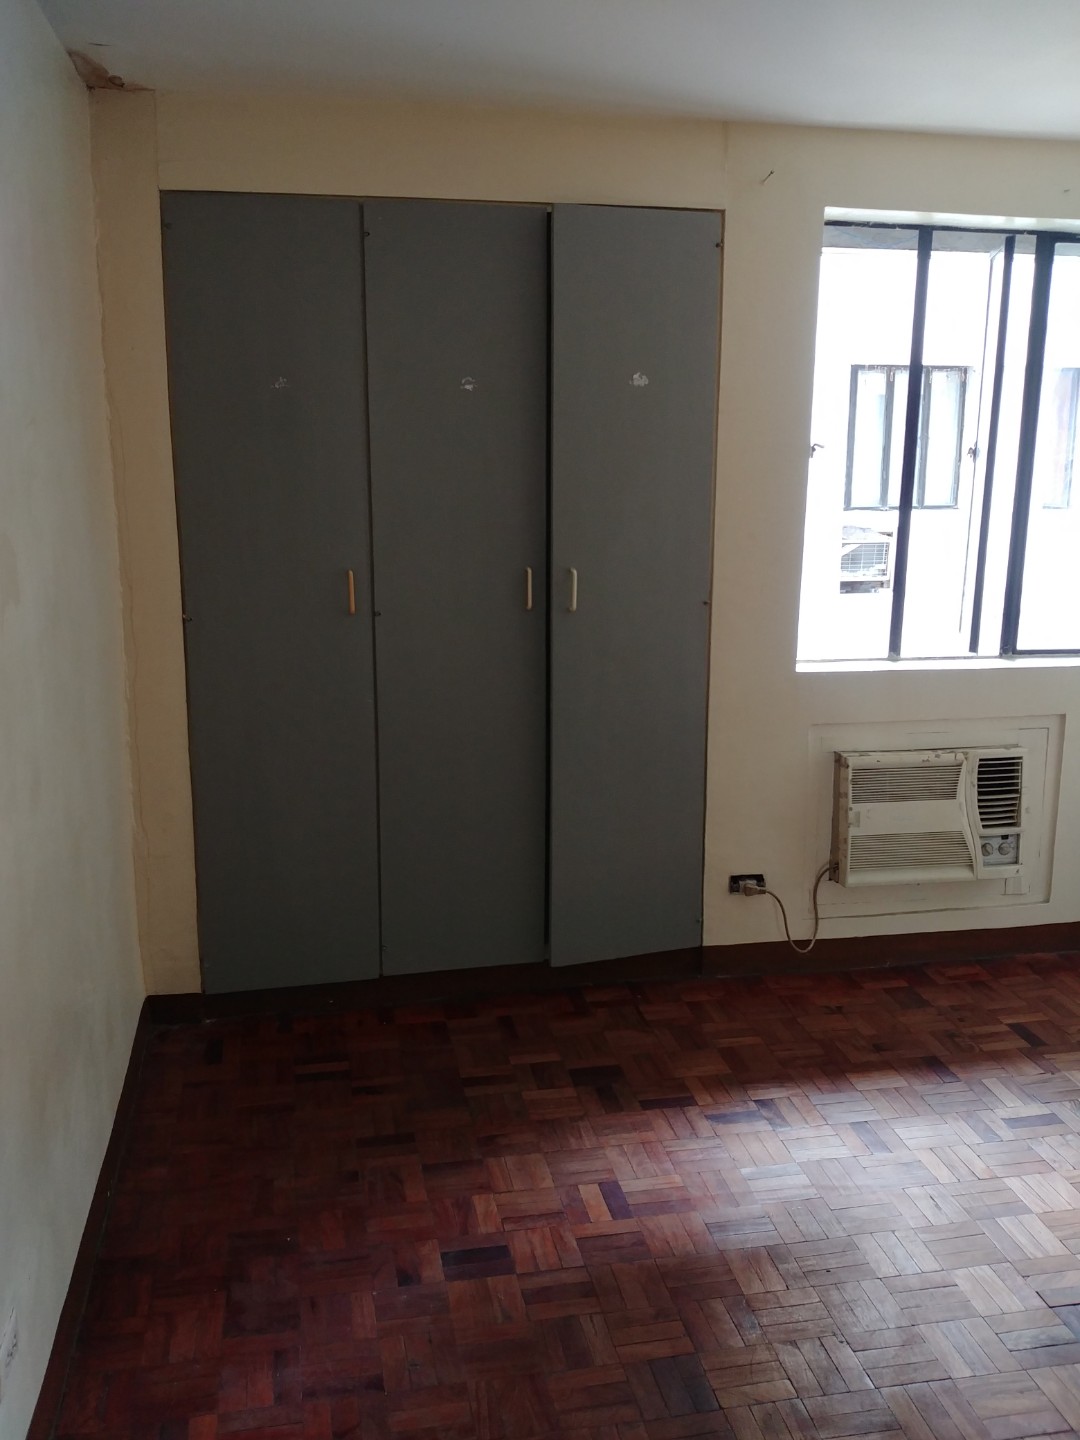 Makati Condo Sharing for Male Only